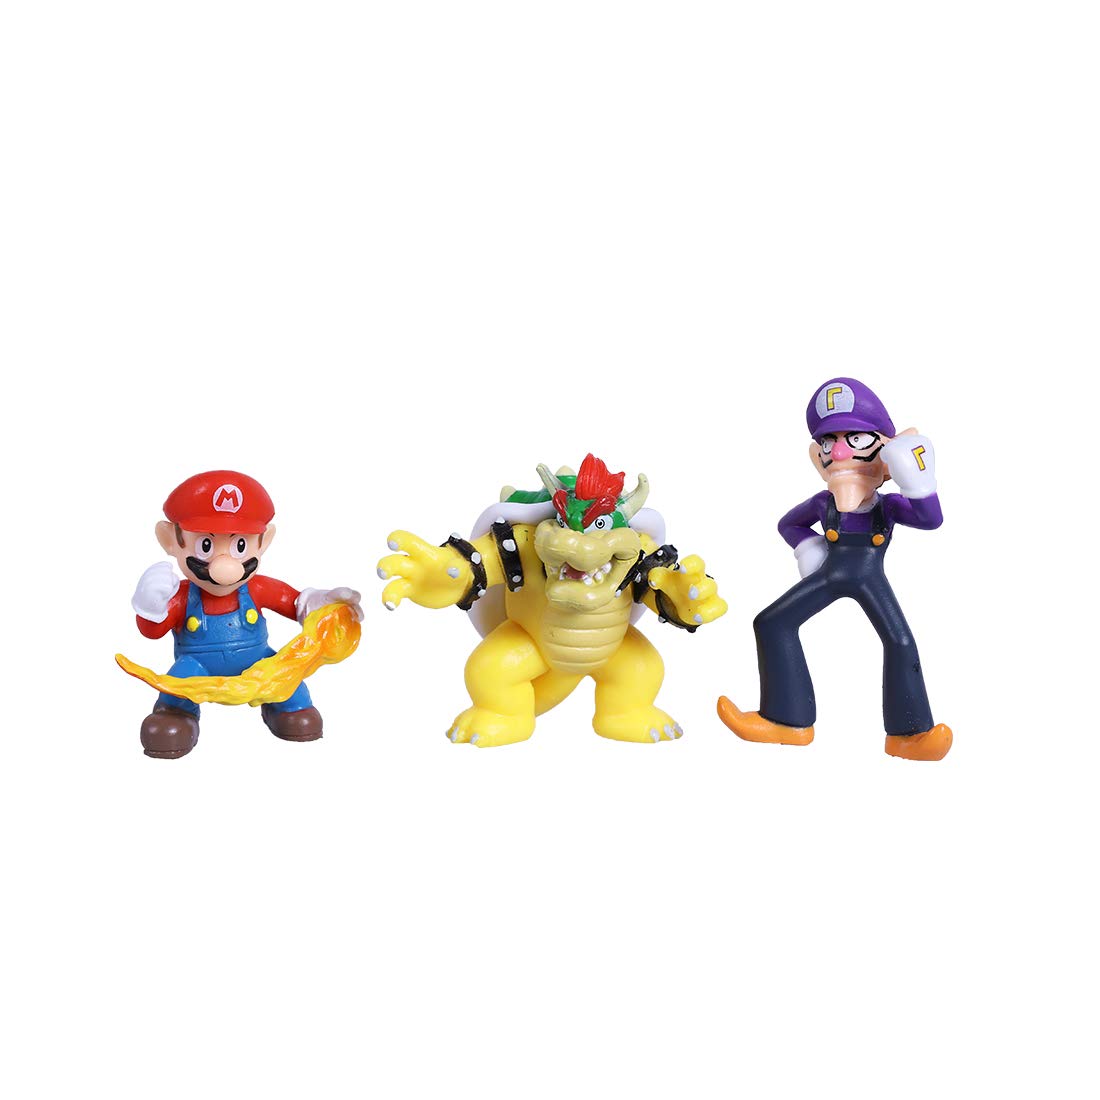 Max Fun 18pcs Mario Brothers Figures Kids Toys Cake Toppers Collection Playset